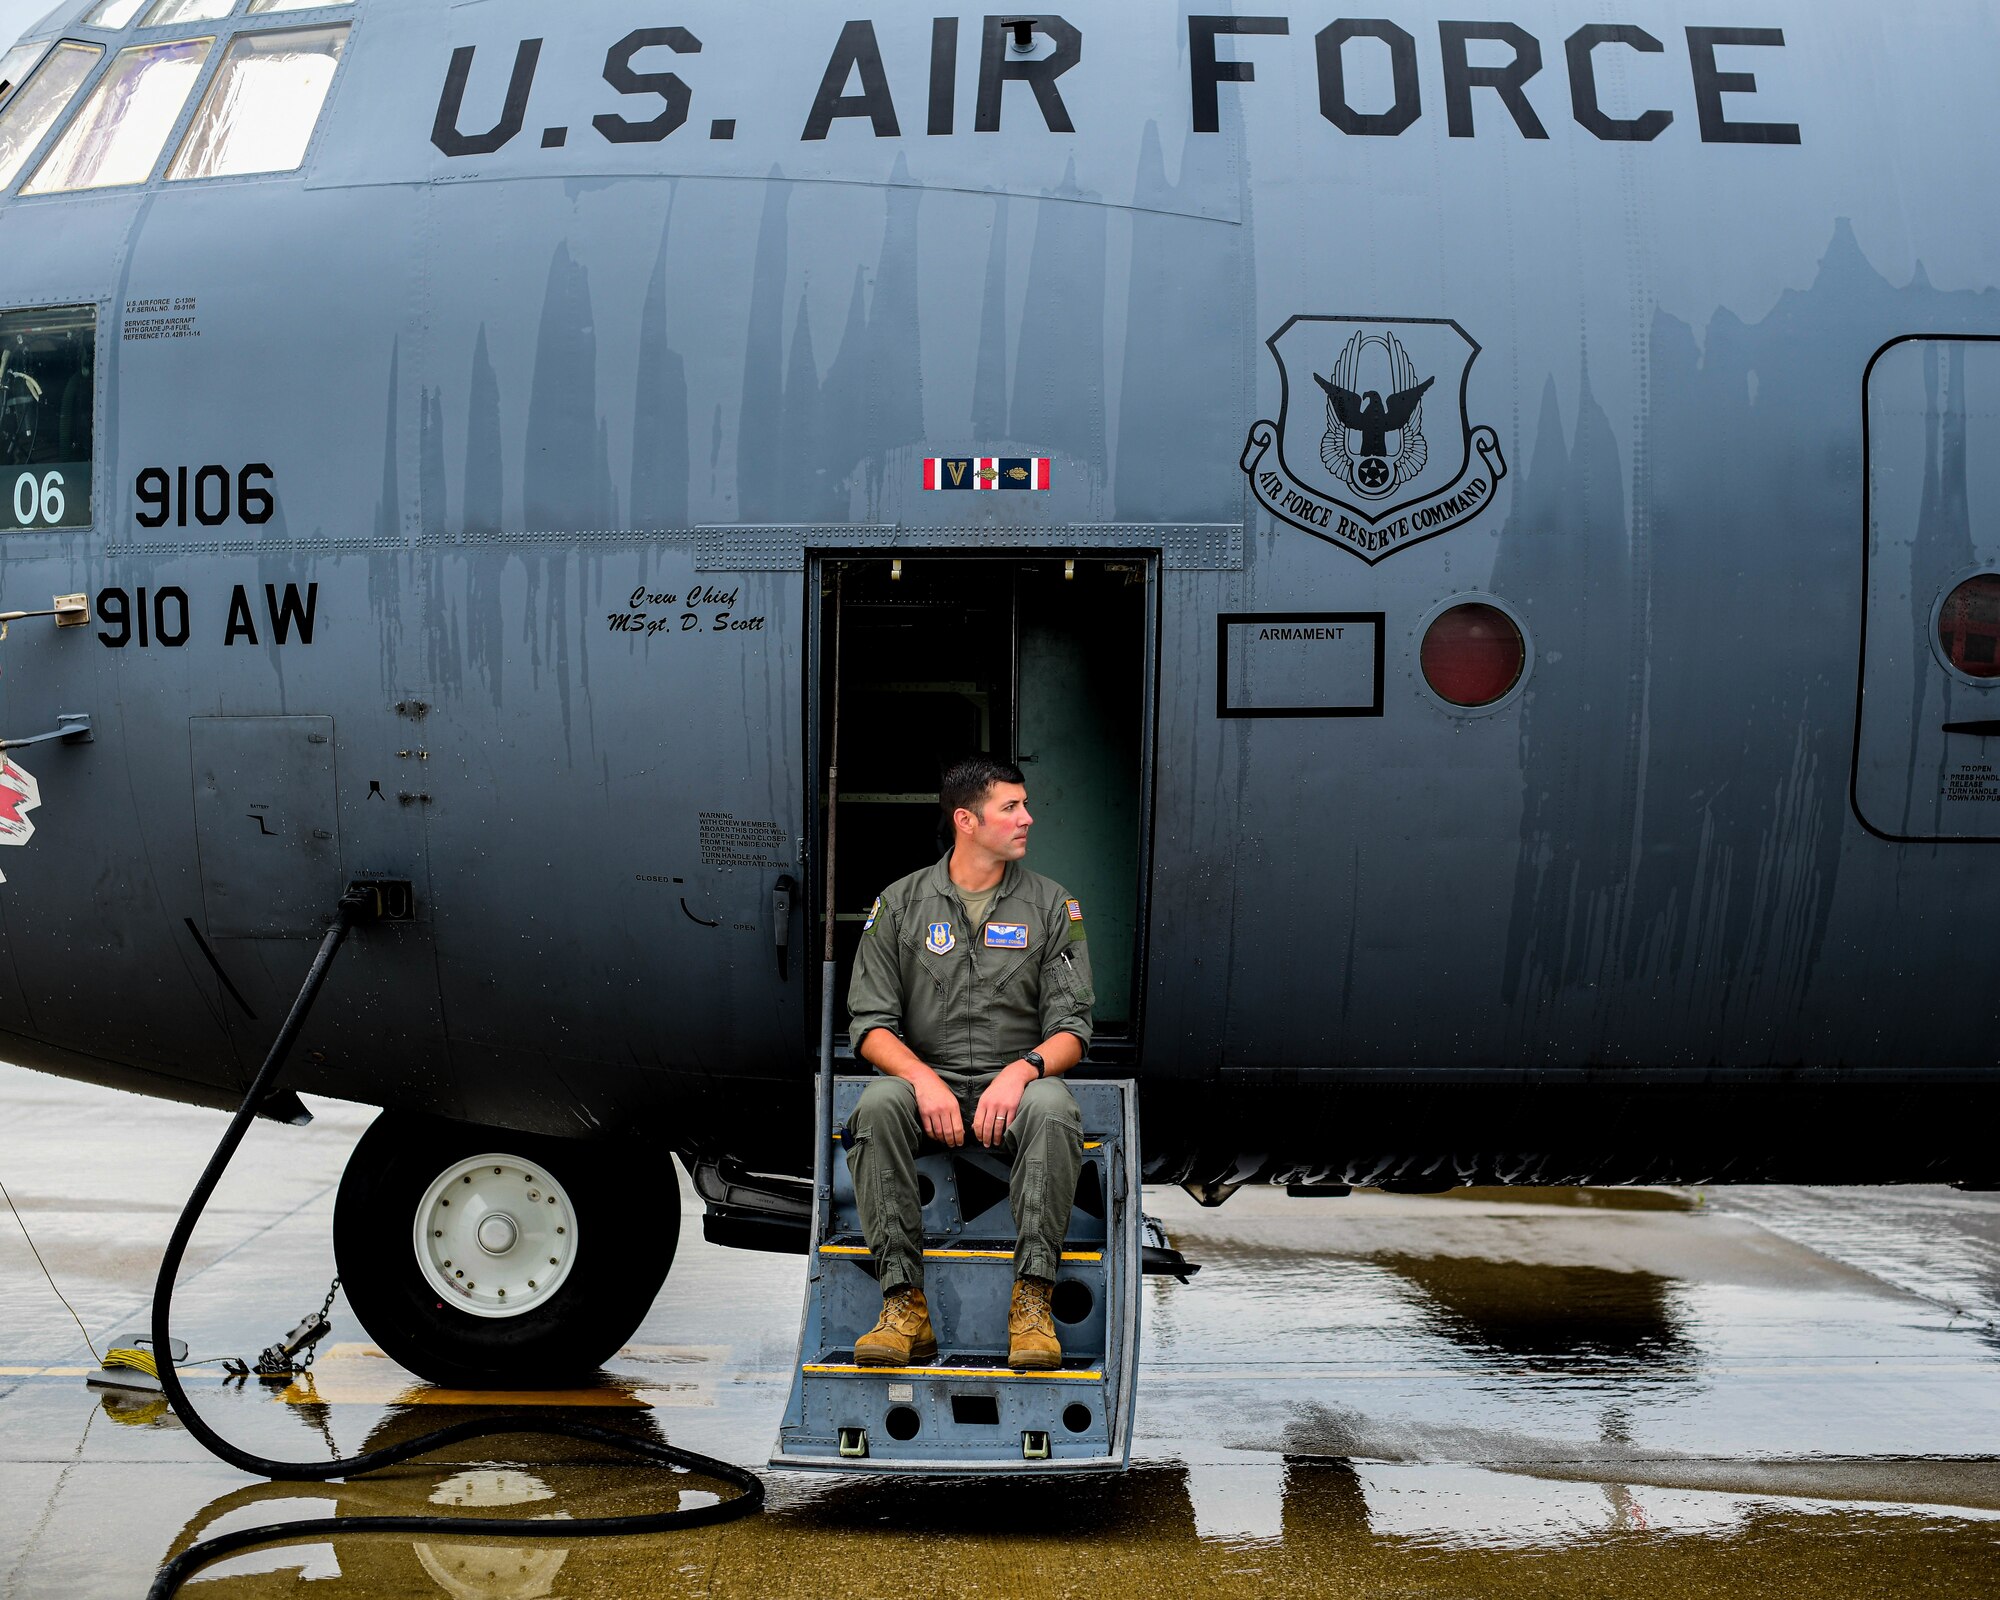 Senior Airman Corey Cornell is a flight engineer with the 757th Airlift Squadron and this month's 910th Airman highlight.